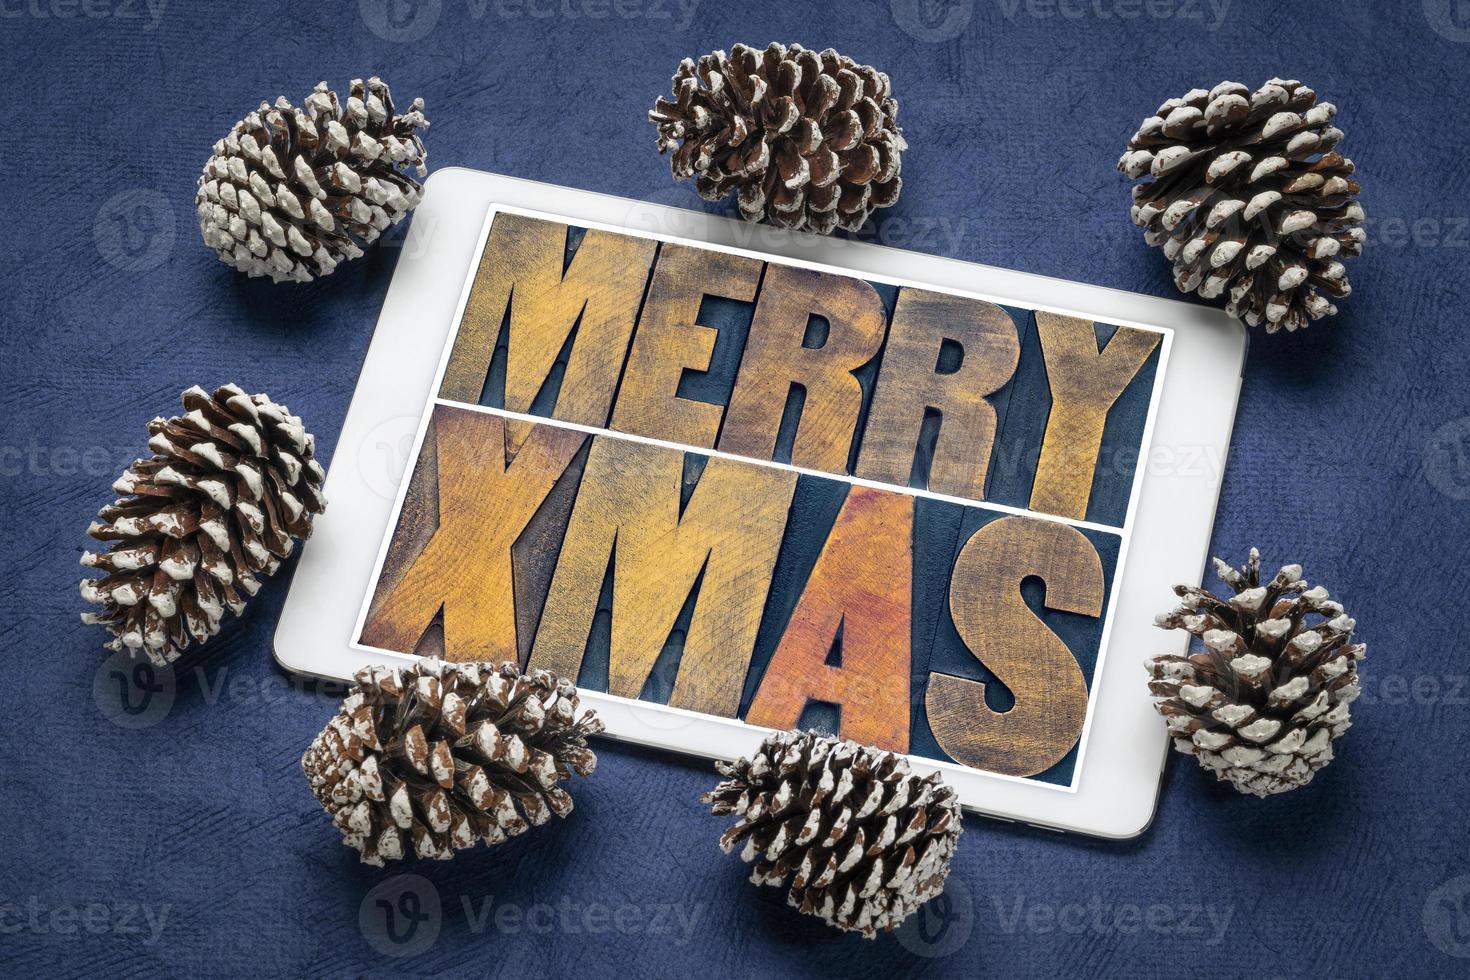 Merry Xmas, Christmas, greetings or wishes photo